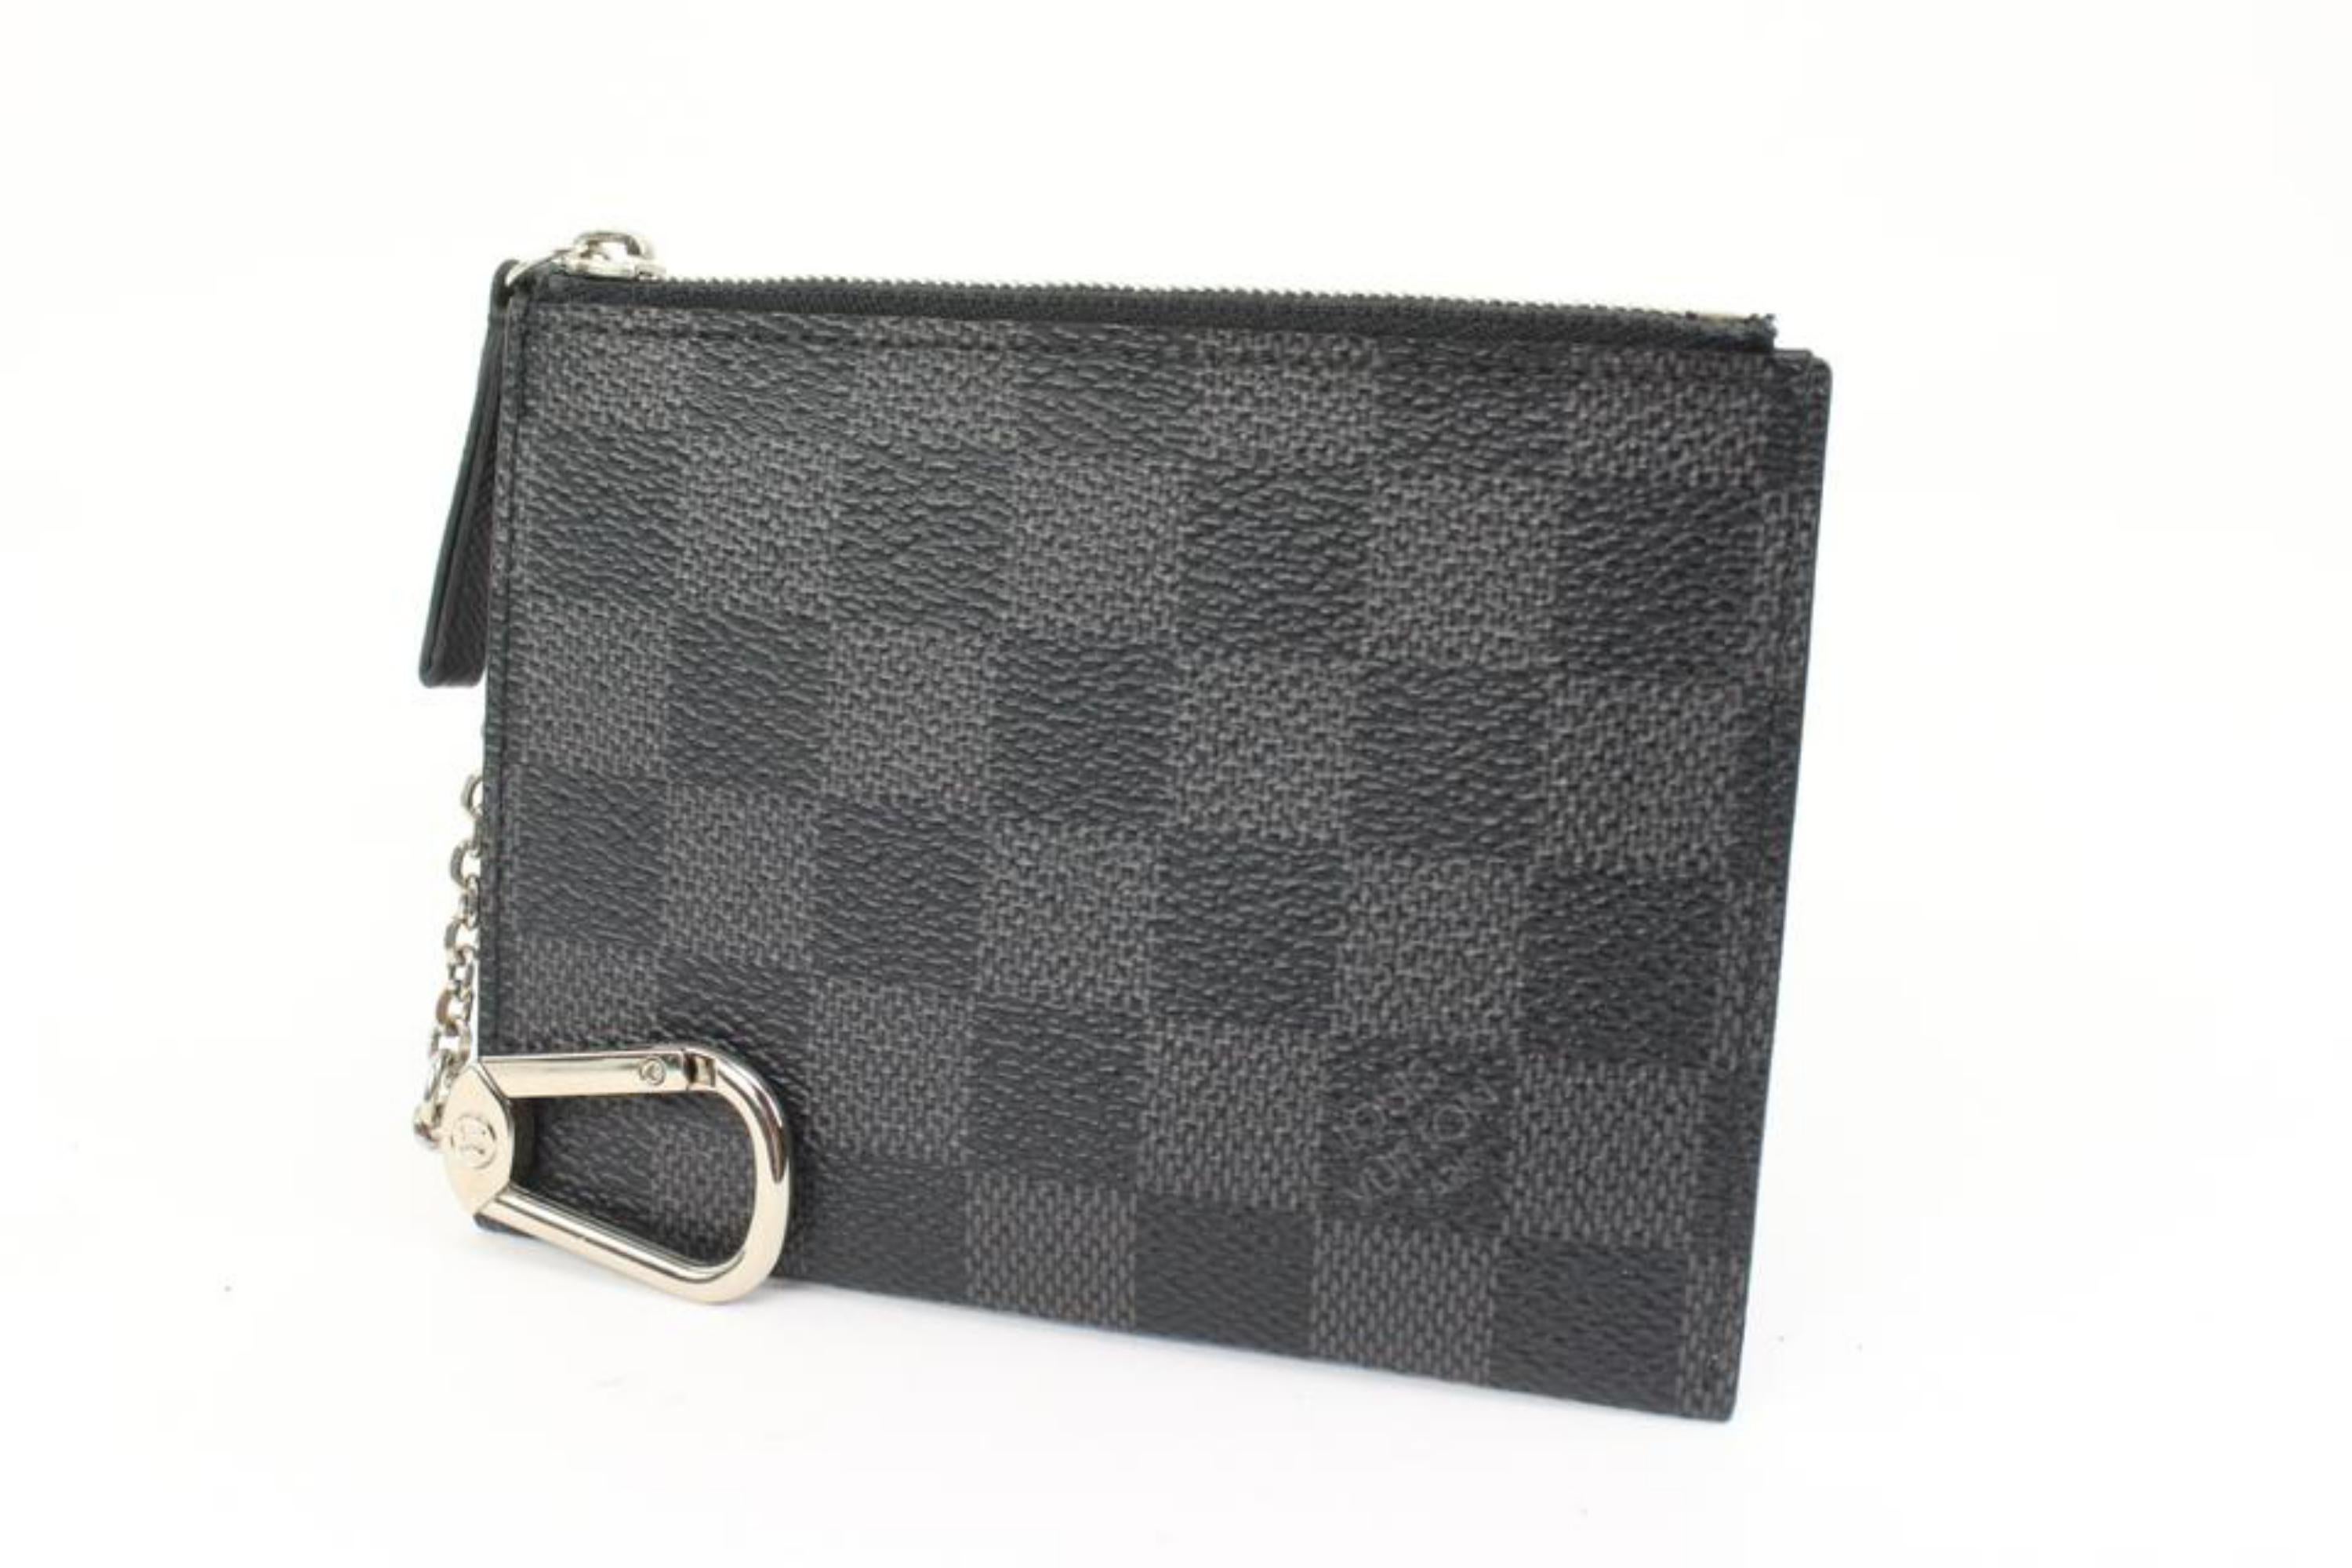 Louis Vuitton Black x Grey Change Pouch Coin Purse Key Case 23lk413s
Date Code/Serial Number: MI2181
Made In: France
Measurements: Length:  4.8